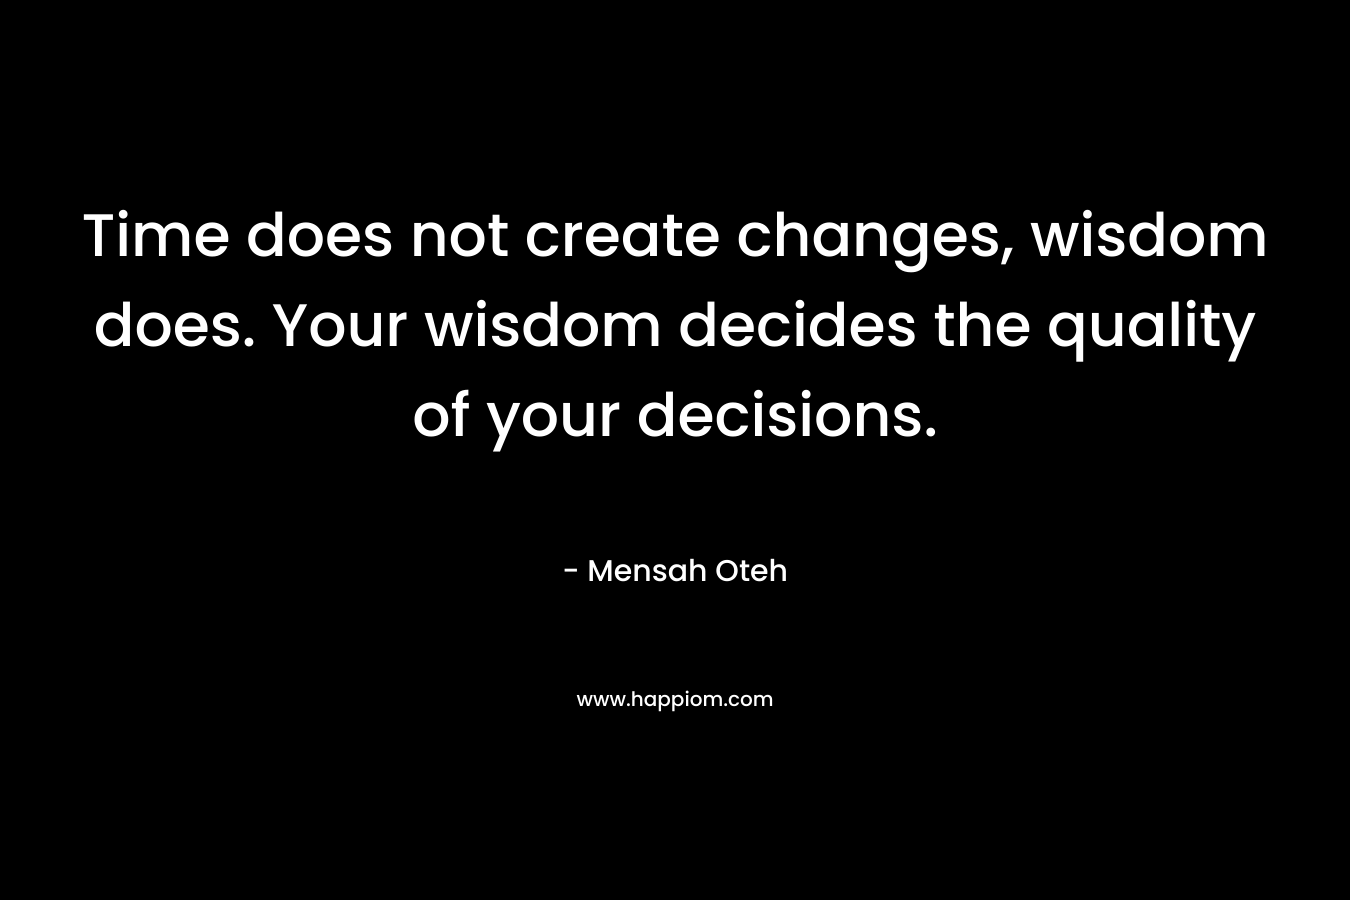 Time does not create changes, wisdom does. Your wisdom decides the quality of your decisions.